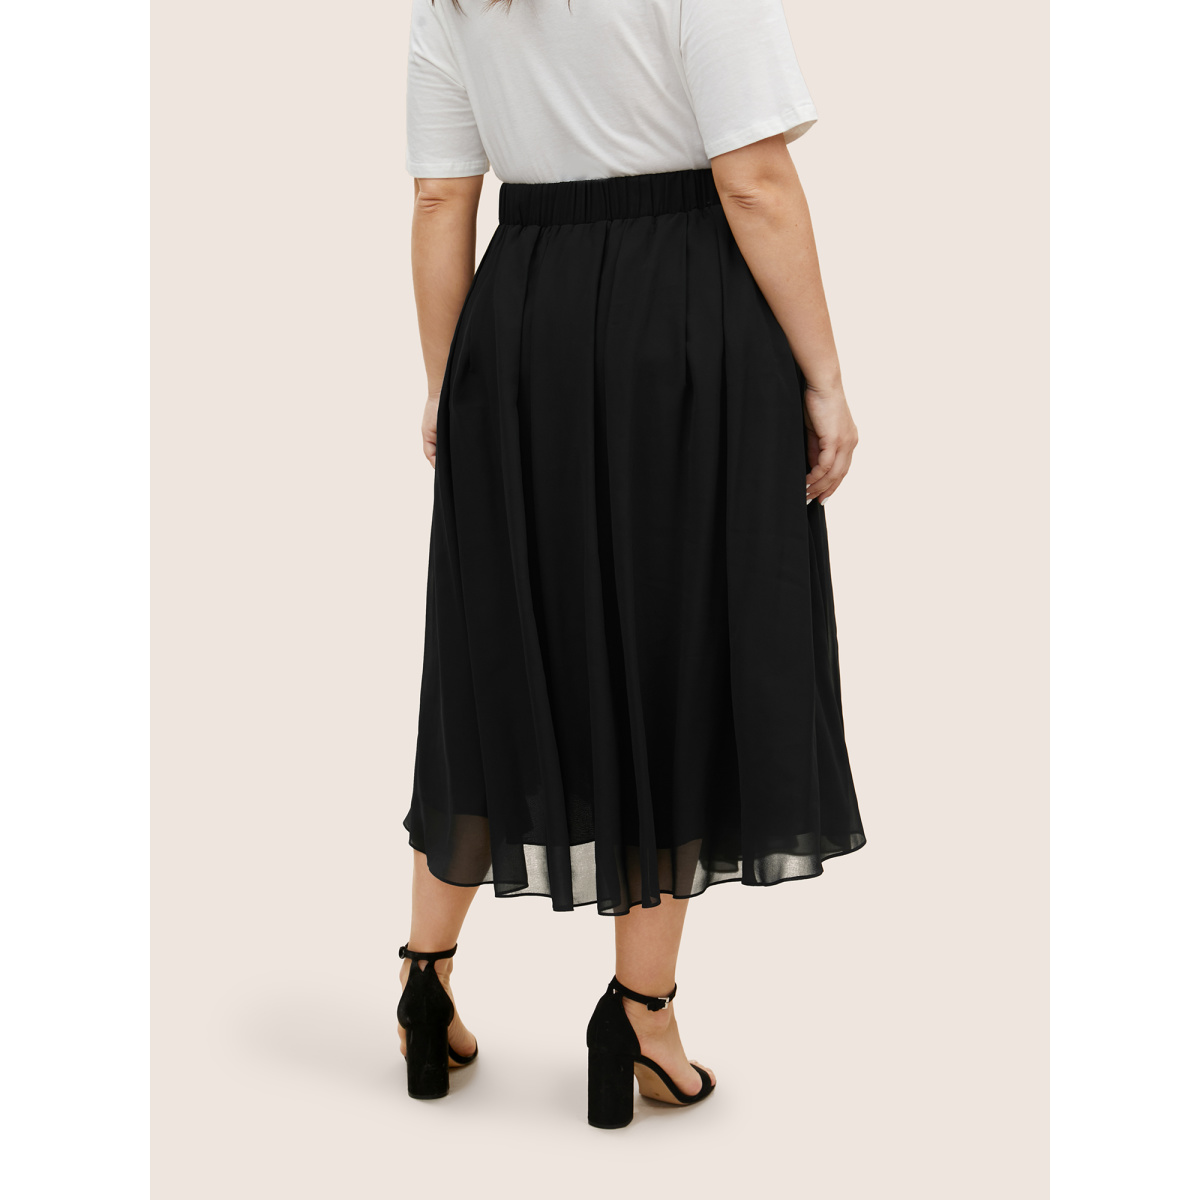 

Plus Size Chiffon Solid See Through Tiered Skirt Women Black Elegant See through No stretch Side seam pocket Everyday Skirts BloomChic